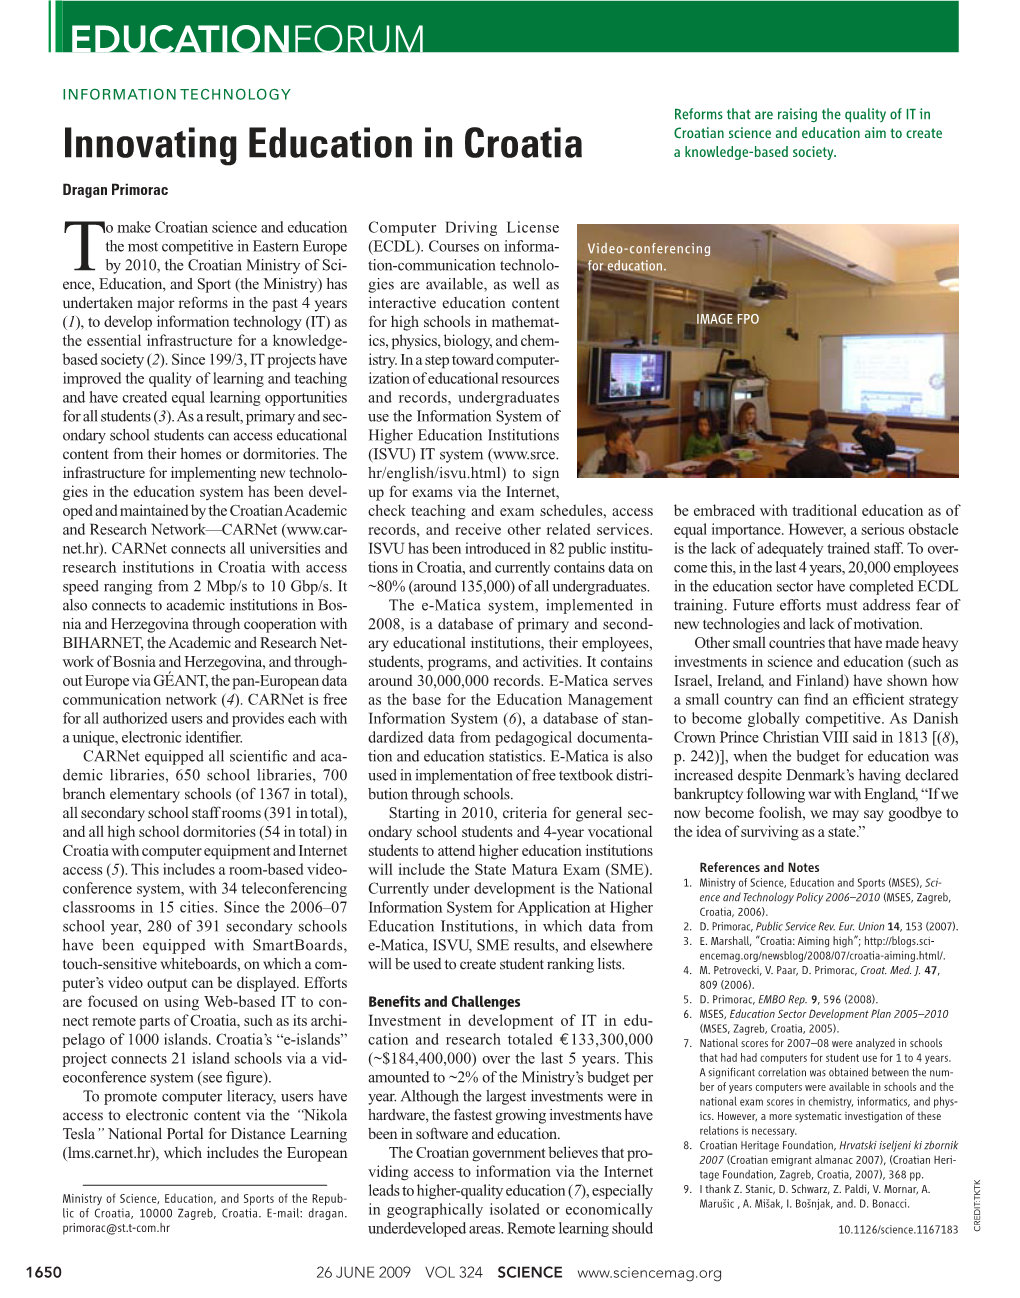 Innovating Education in Croatia a Knowledge-Based Society